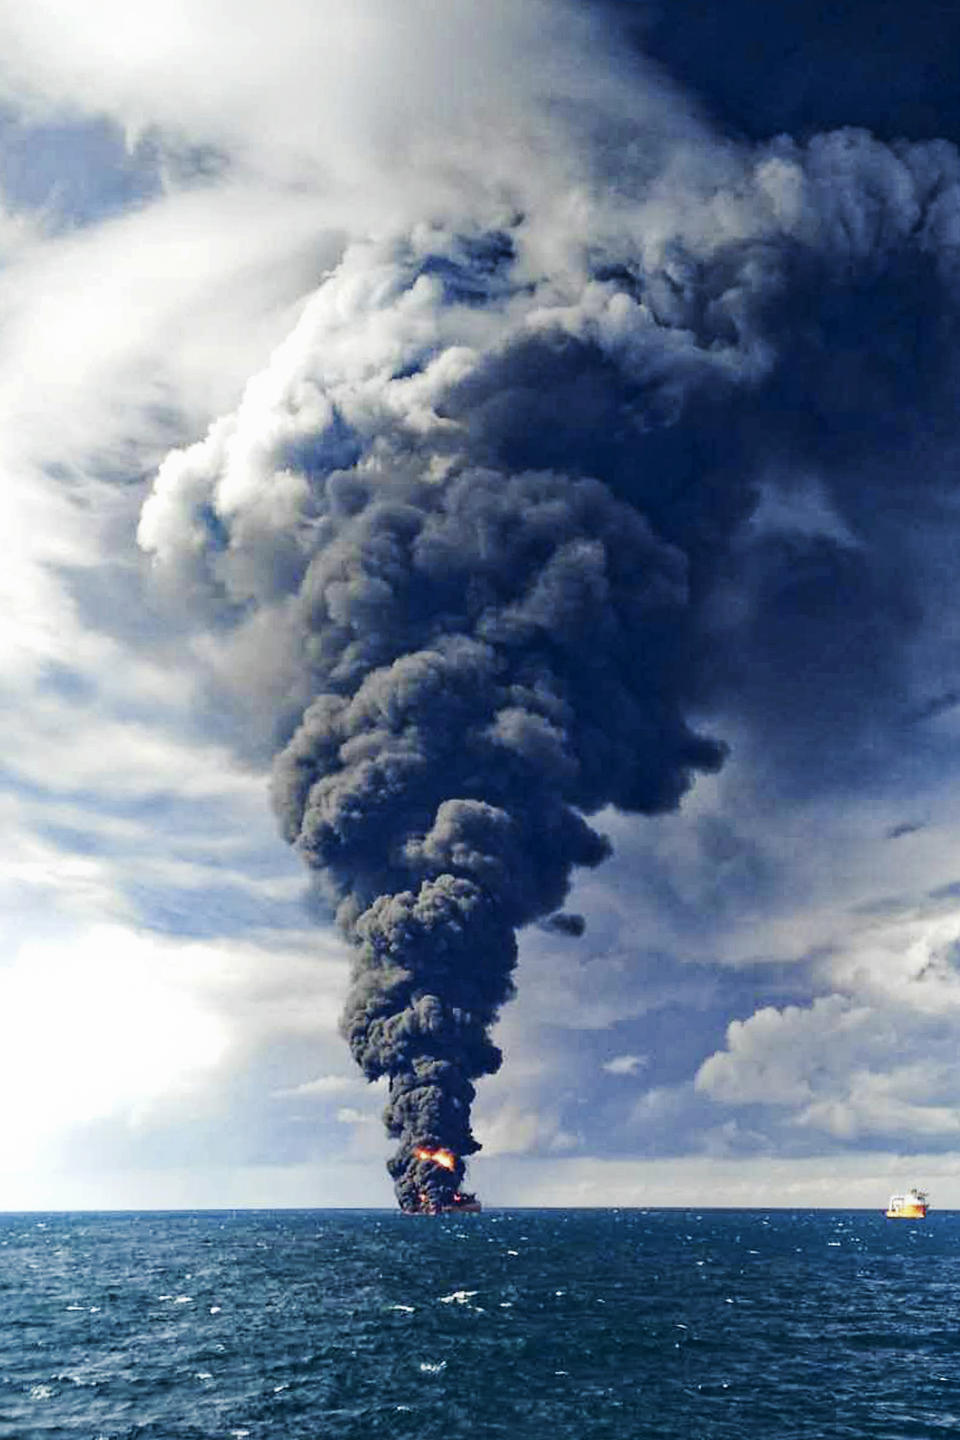 <p>Smokes and frames from the burning Iranian oil tanker Sanchi in the East China Sea off the eastern coast of China, Jan. 14, 2018. The fire from the sunken Iranian tanker ship in the East China Sea has burned out, a Chinese transport ministry spokesman said Monday, although concerns remain about possible major pollution to the sea bed and surrounding waters. (Ministry of Transport via AP) </p>